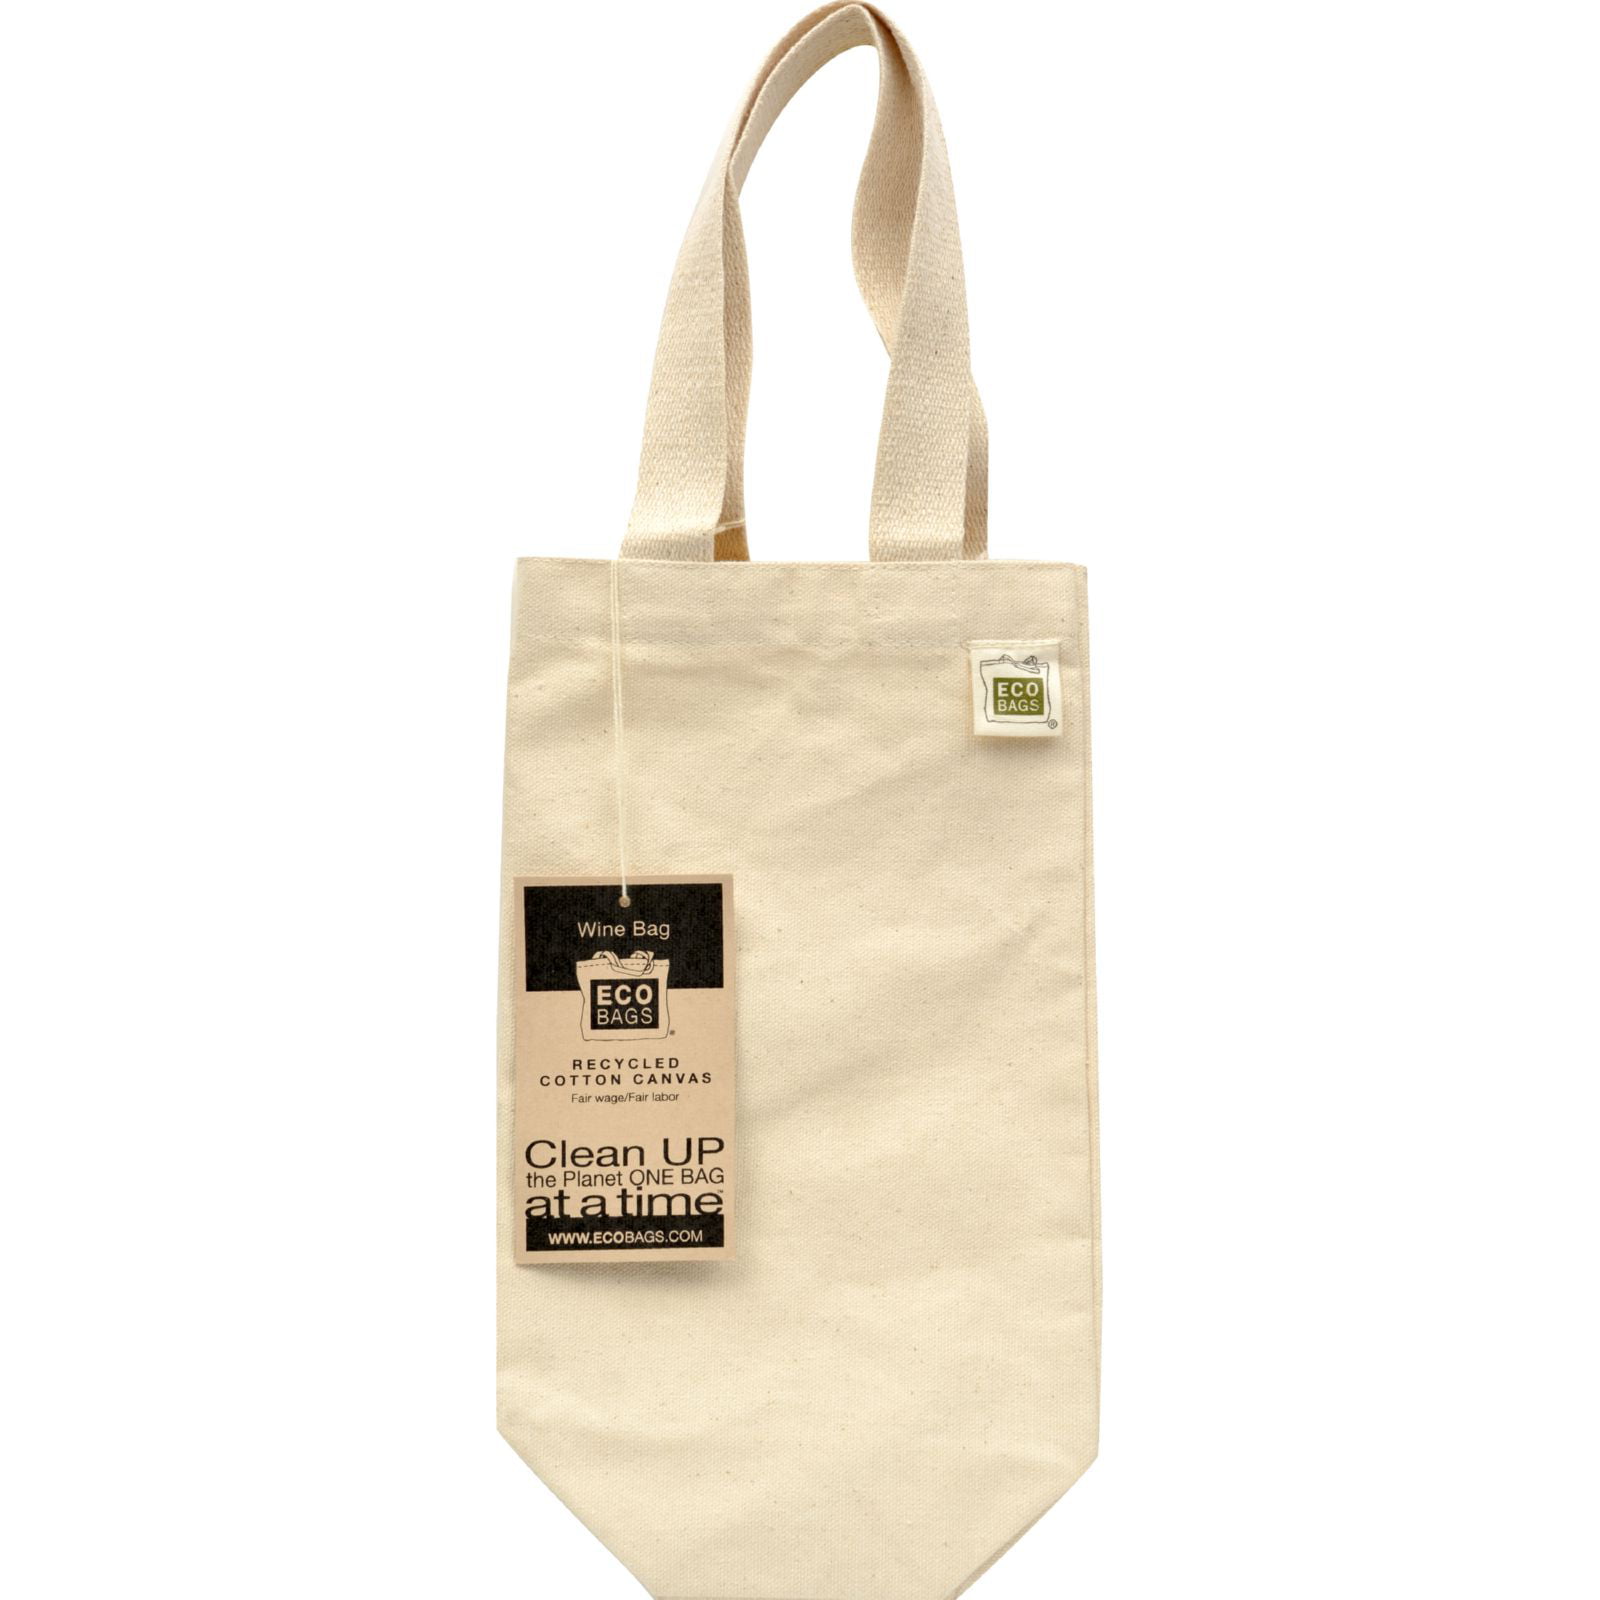 ECOBAGS Canvas Wine Bag (1 bottle) 6.5x12 - Recycled Cotton - 1 Bag ...